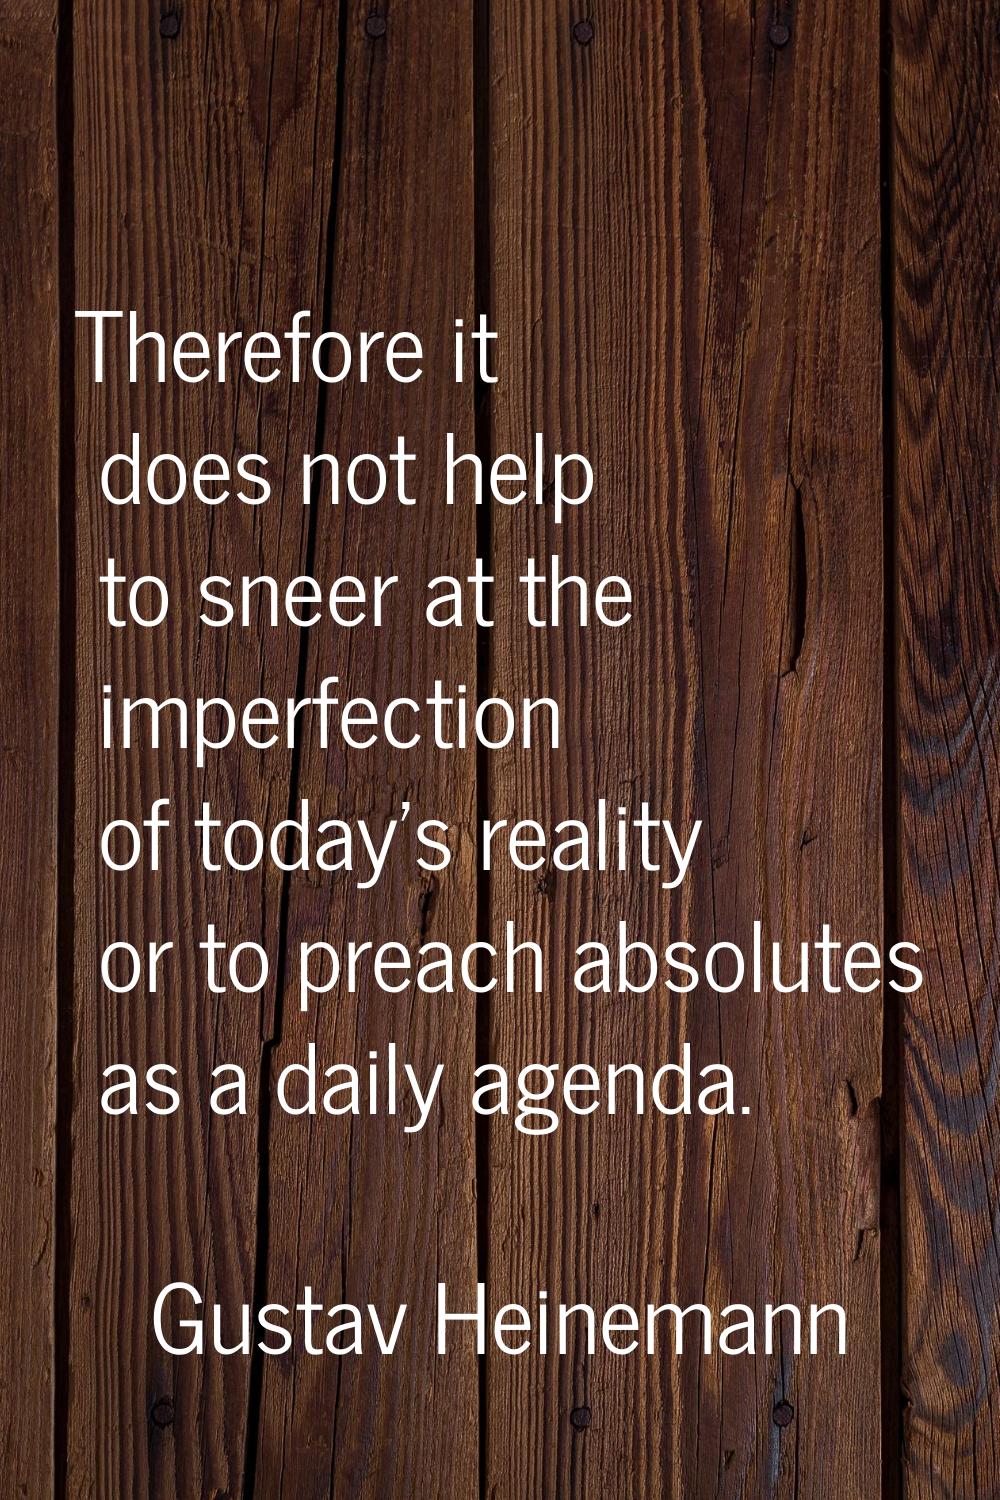 Therefore it does not help to sneer at the imperfection of today's reality or to preach absolutes a